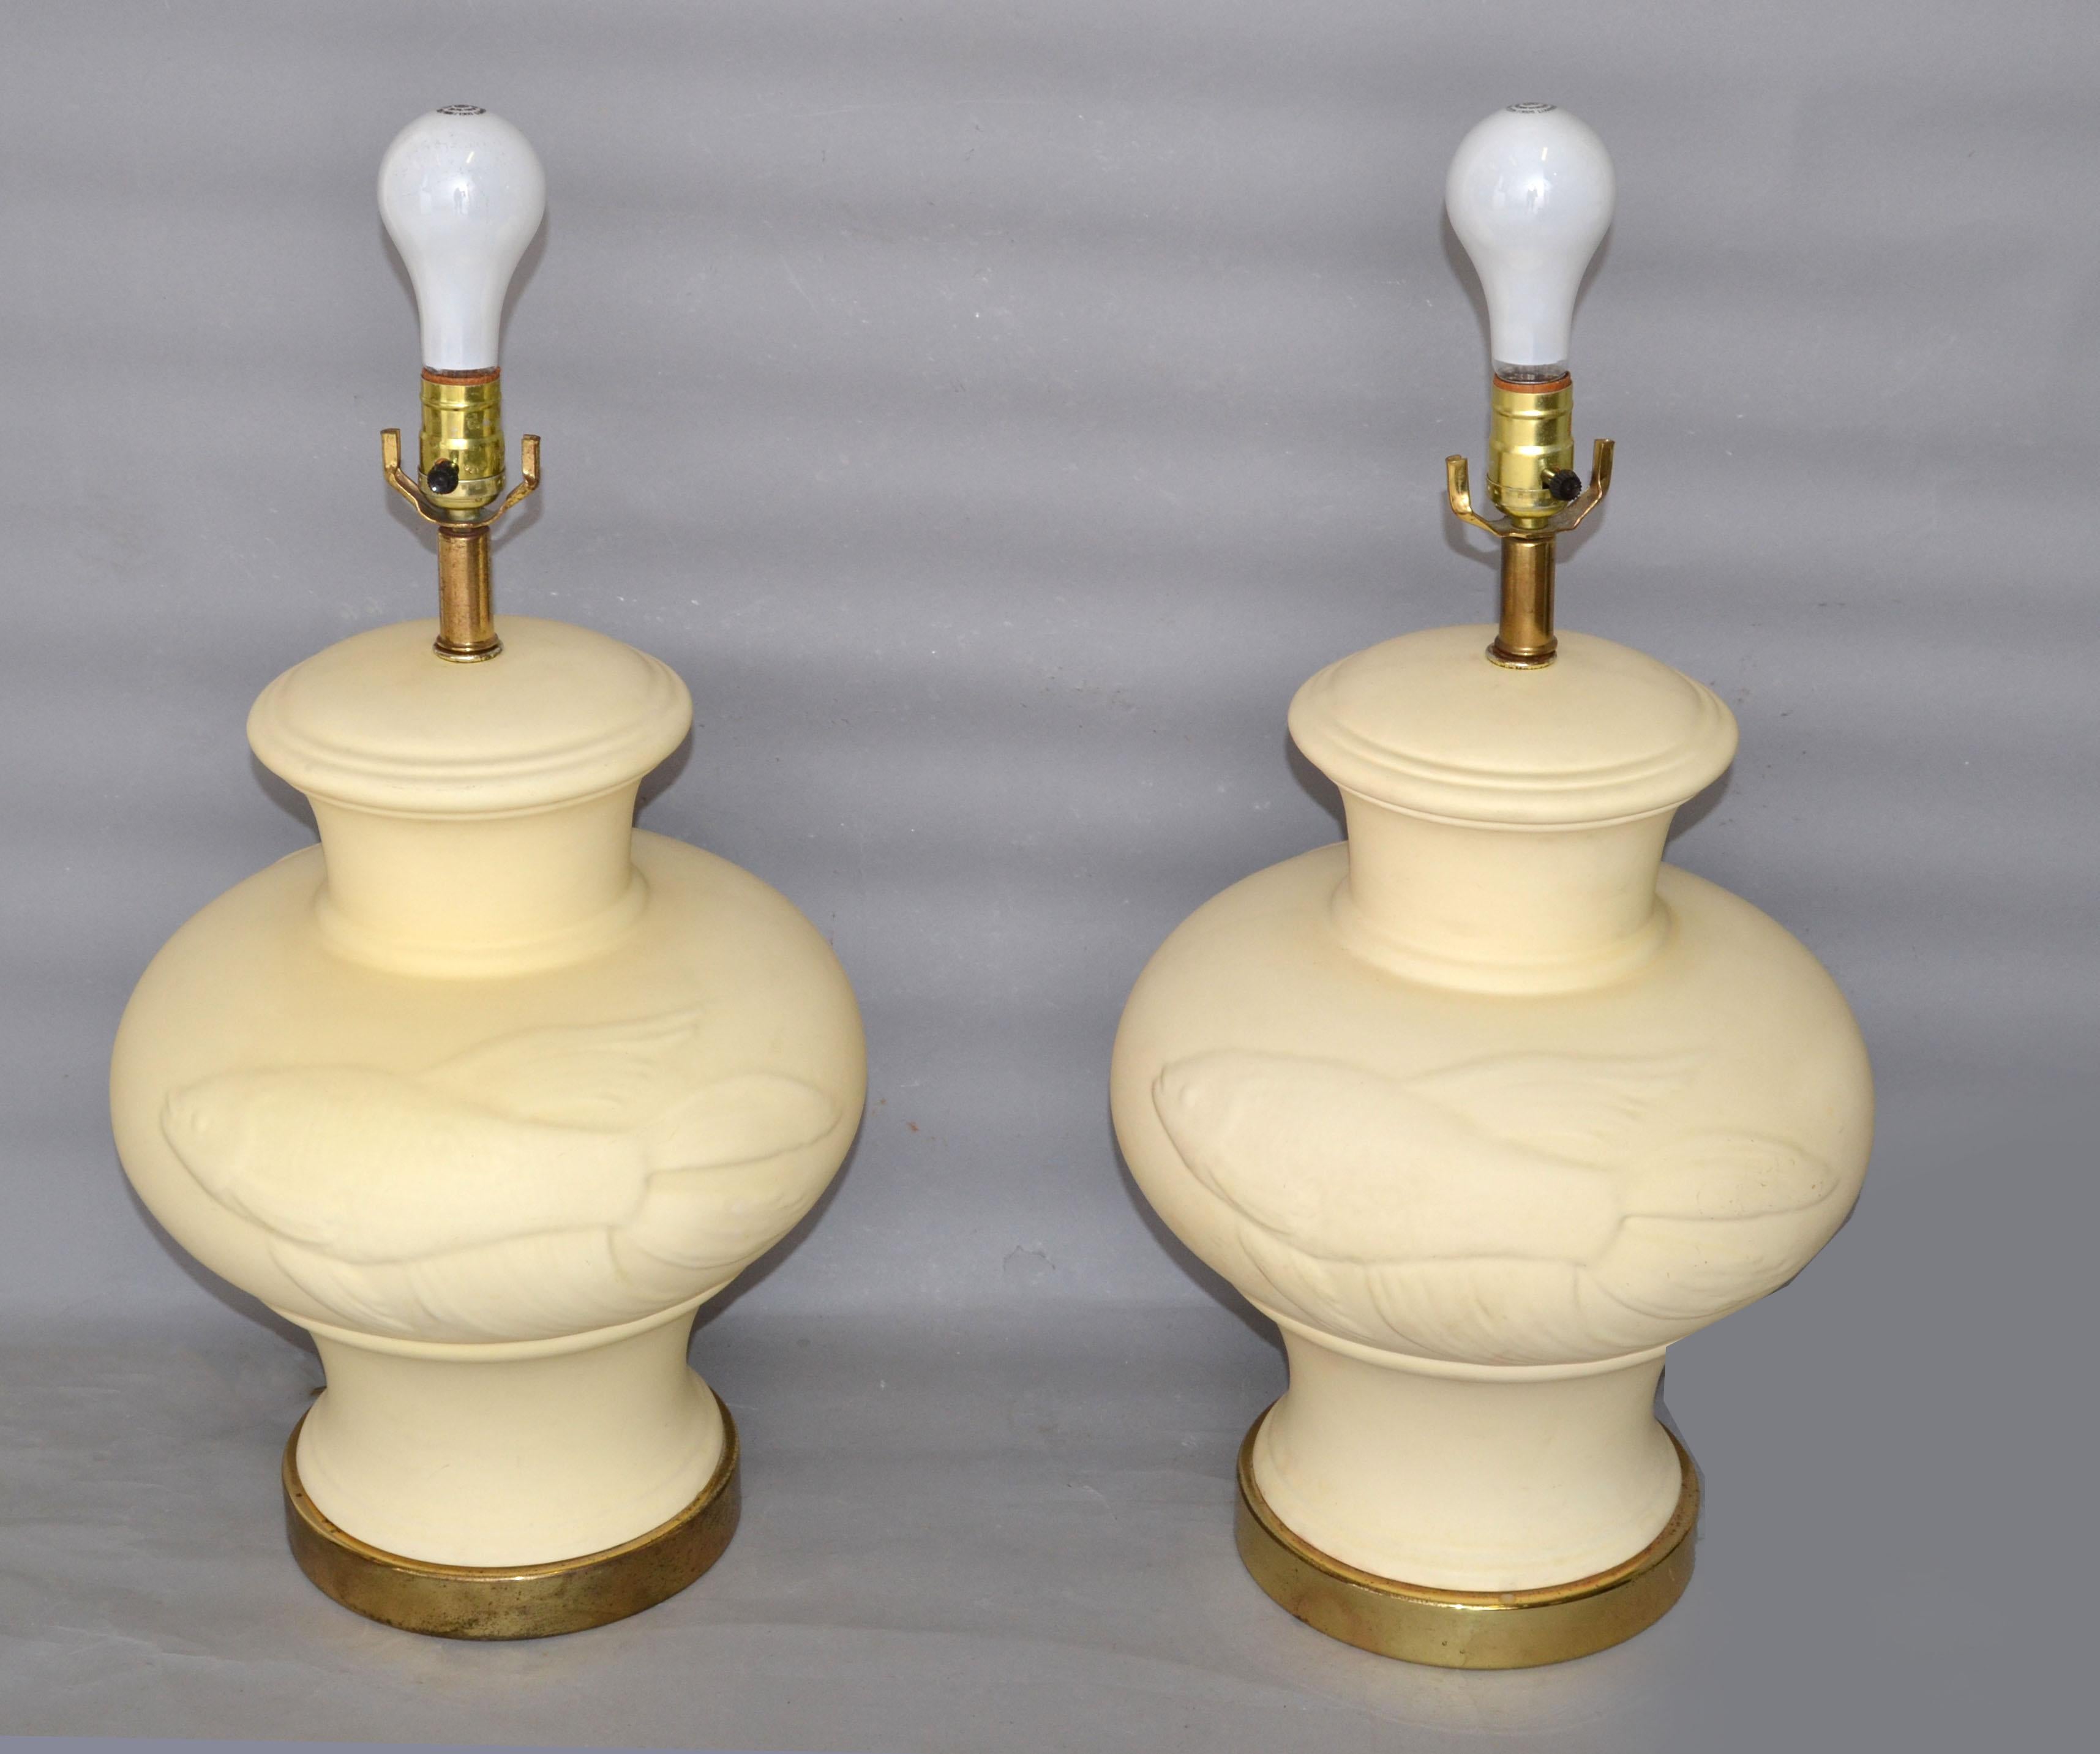 Hand-Crafted 1970 Chinese Inspired Beige Ceramic & Brass Table Lamps with Koi Fish Image Pair For Sale